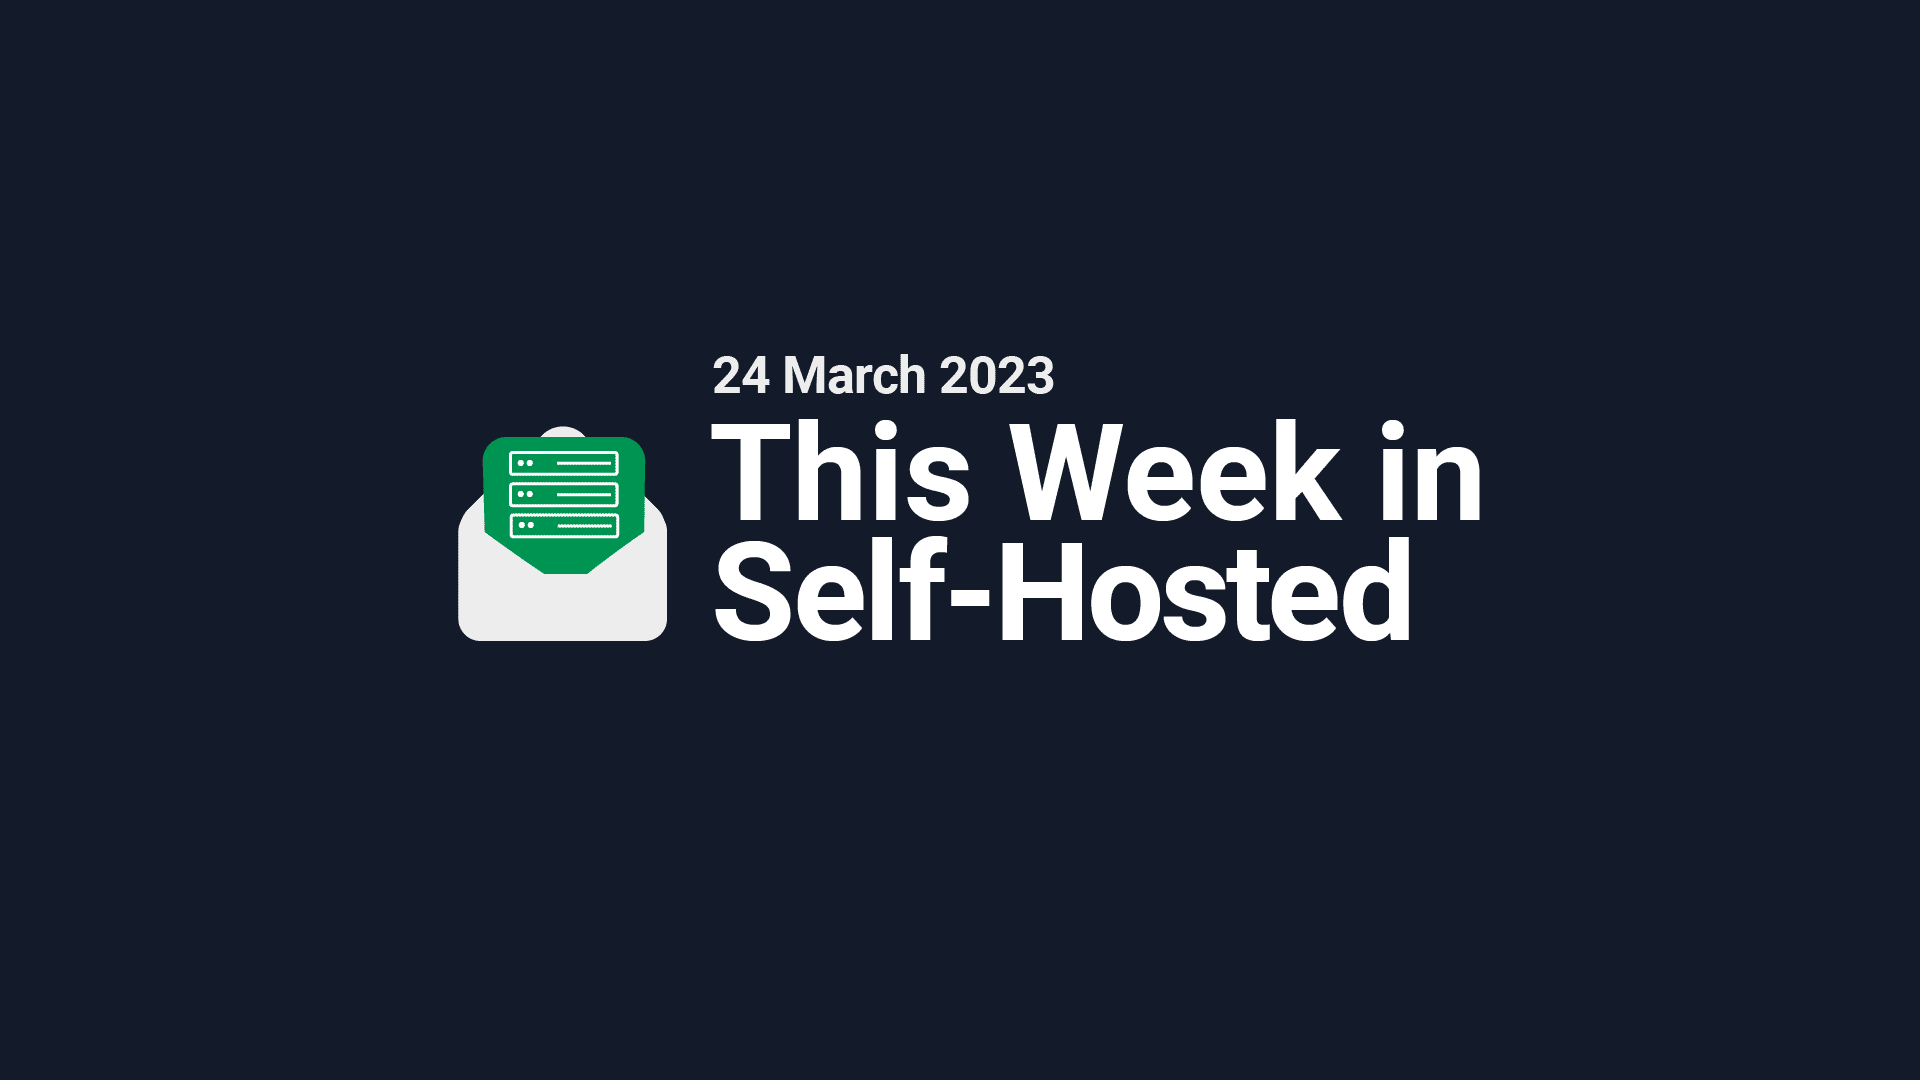 This Week in Self-Hosted (24 March 2023) Post image